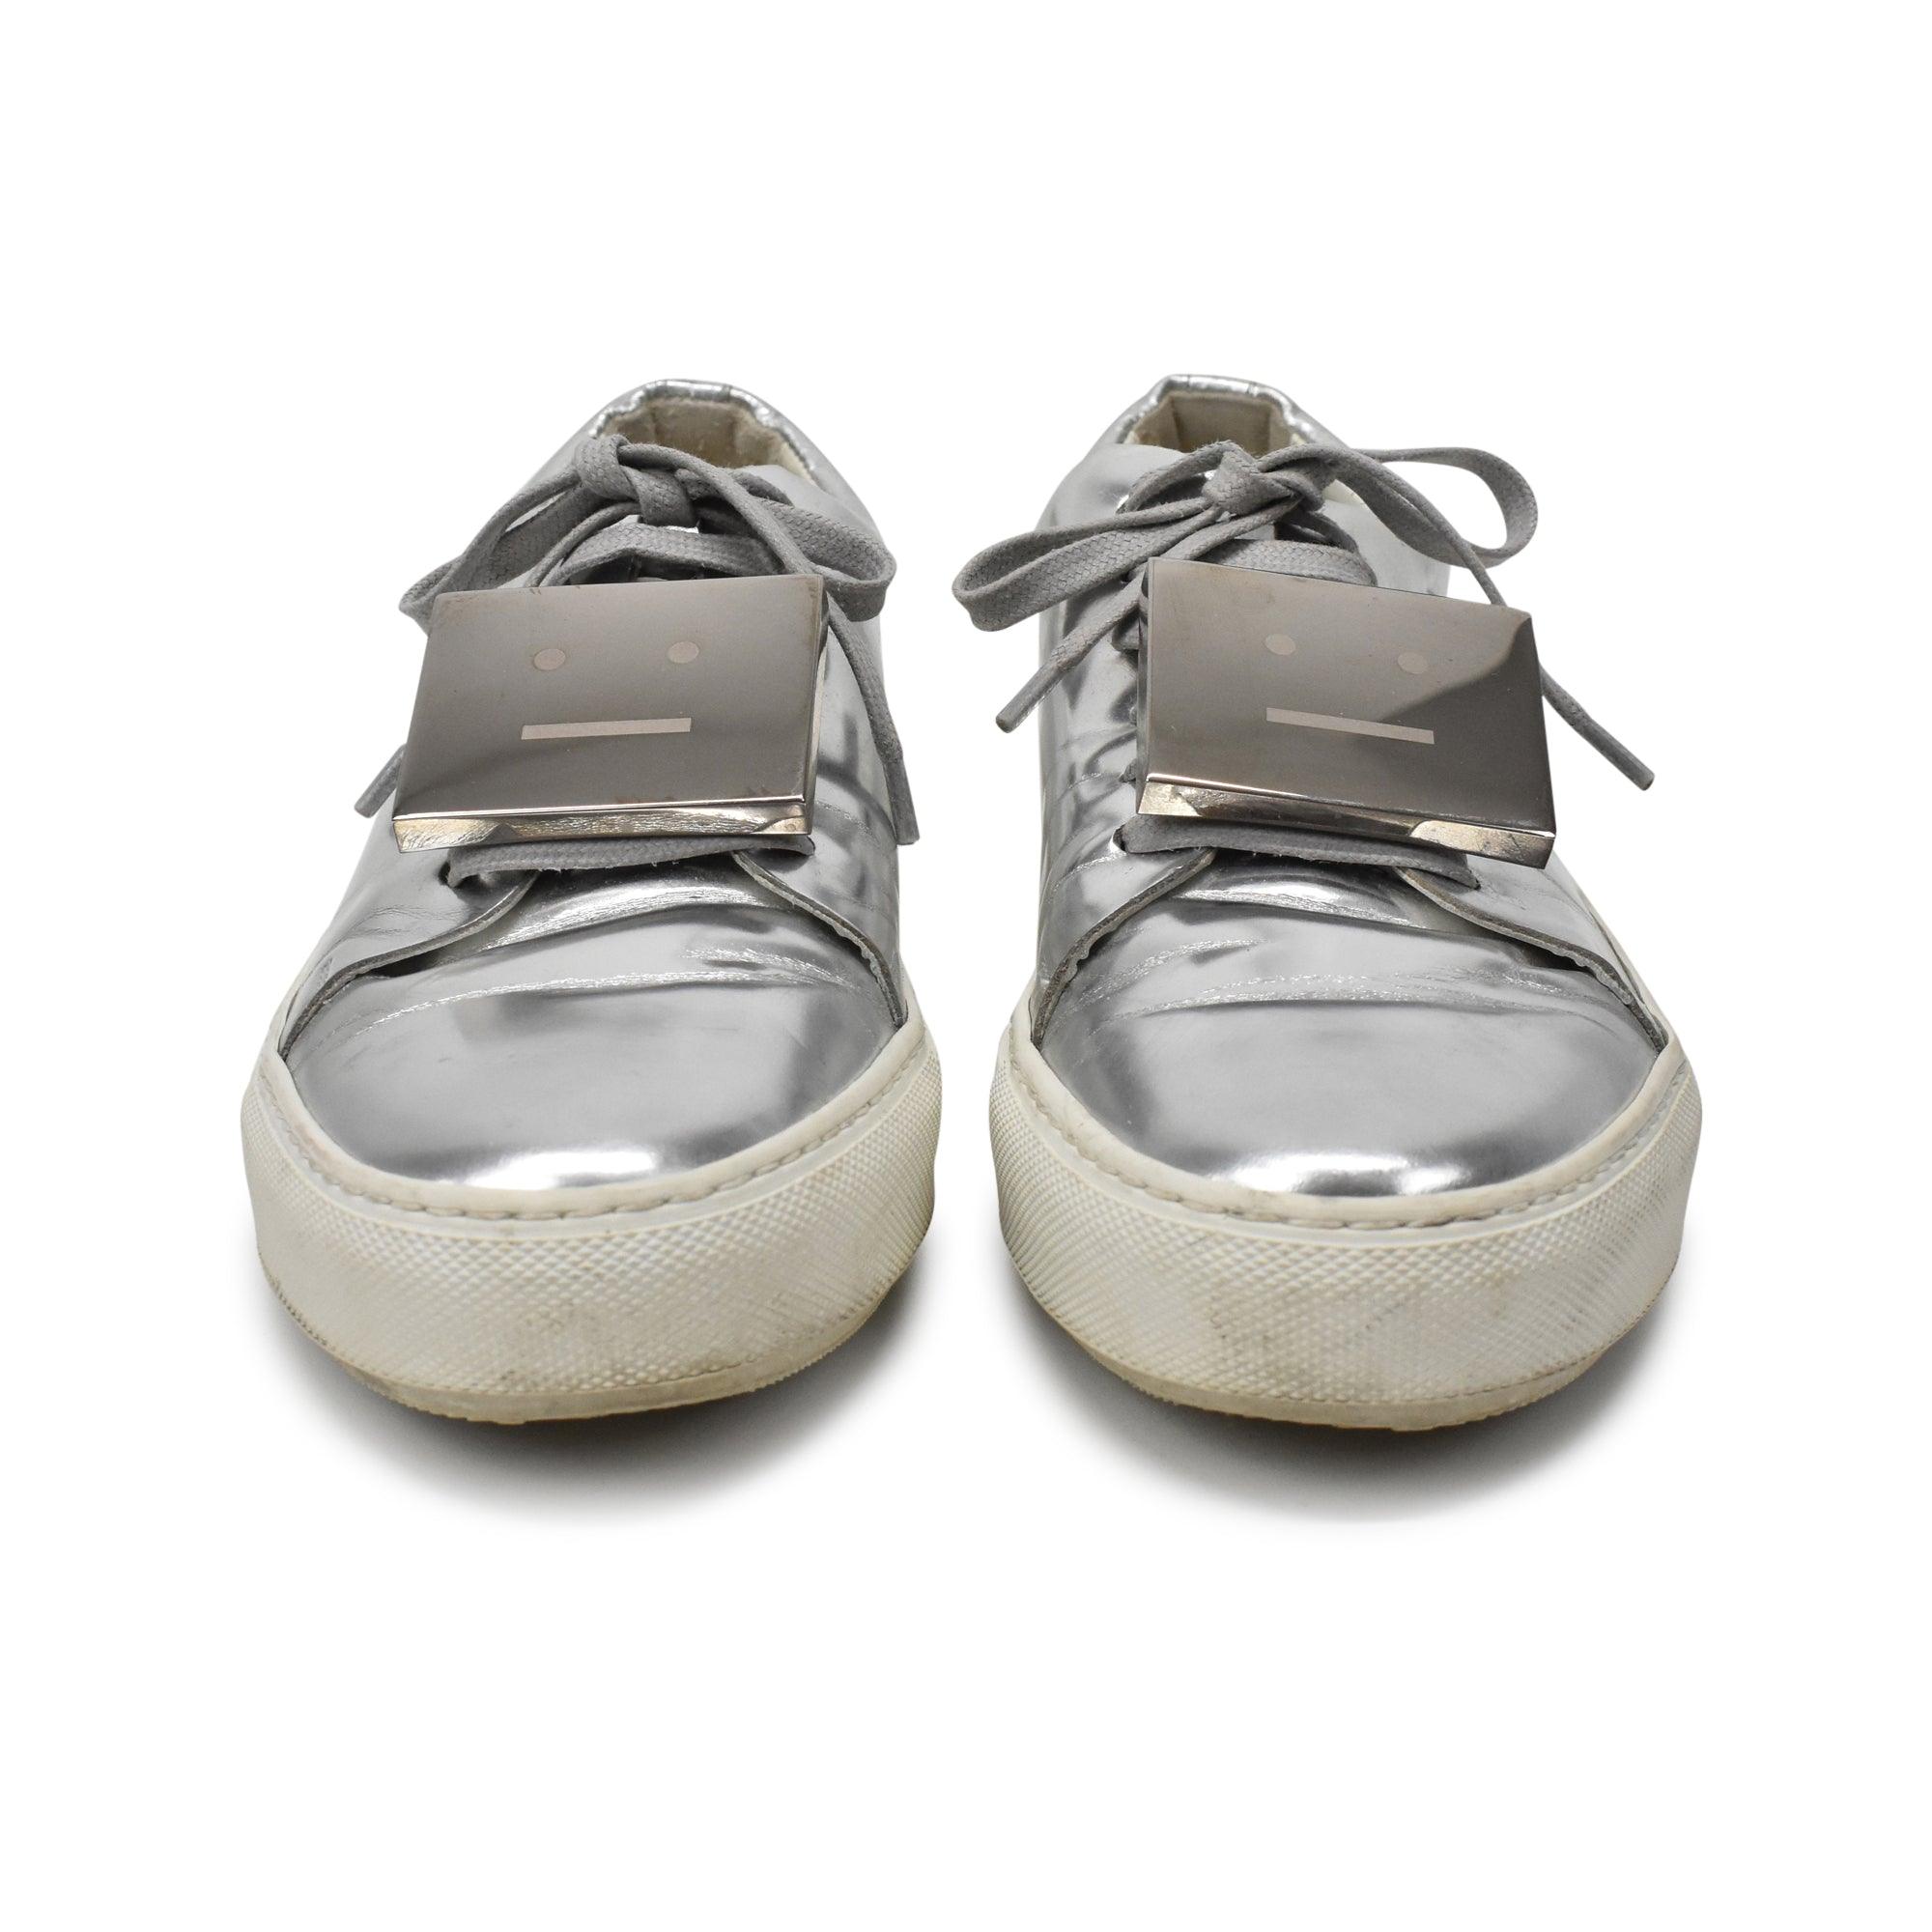 Acne Studios Sneakers - Women's 39 - Fashionably Yours